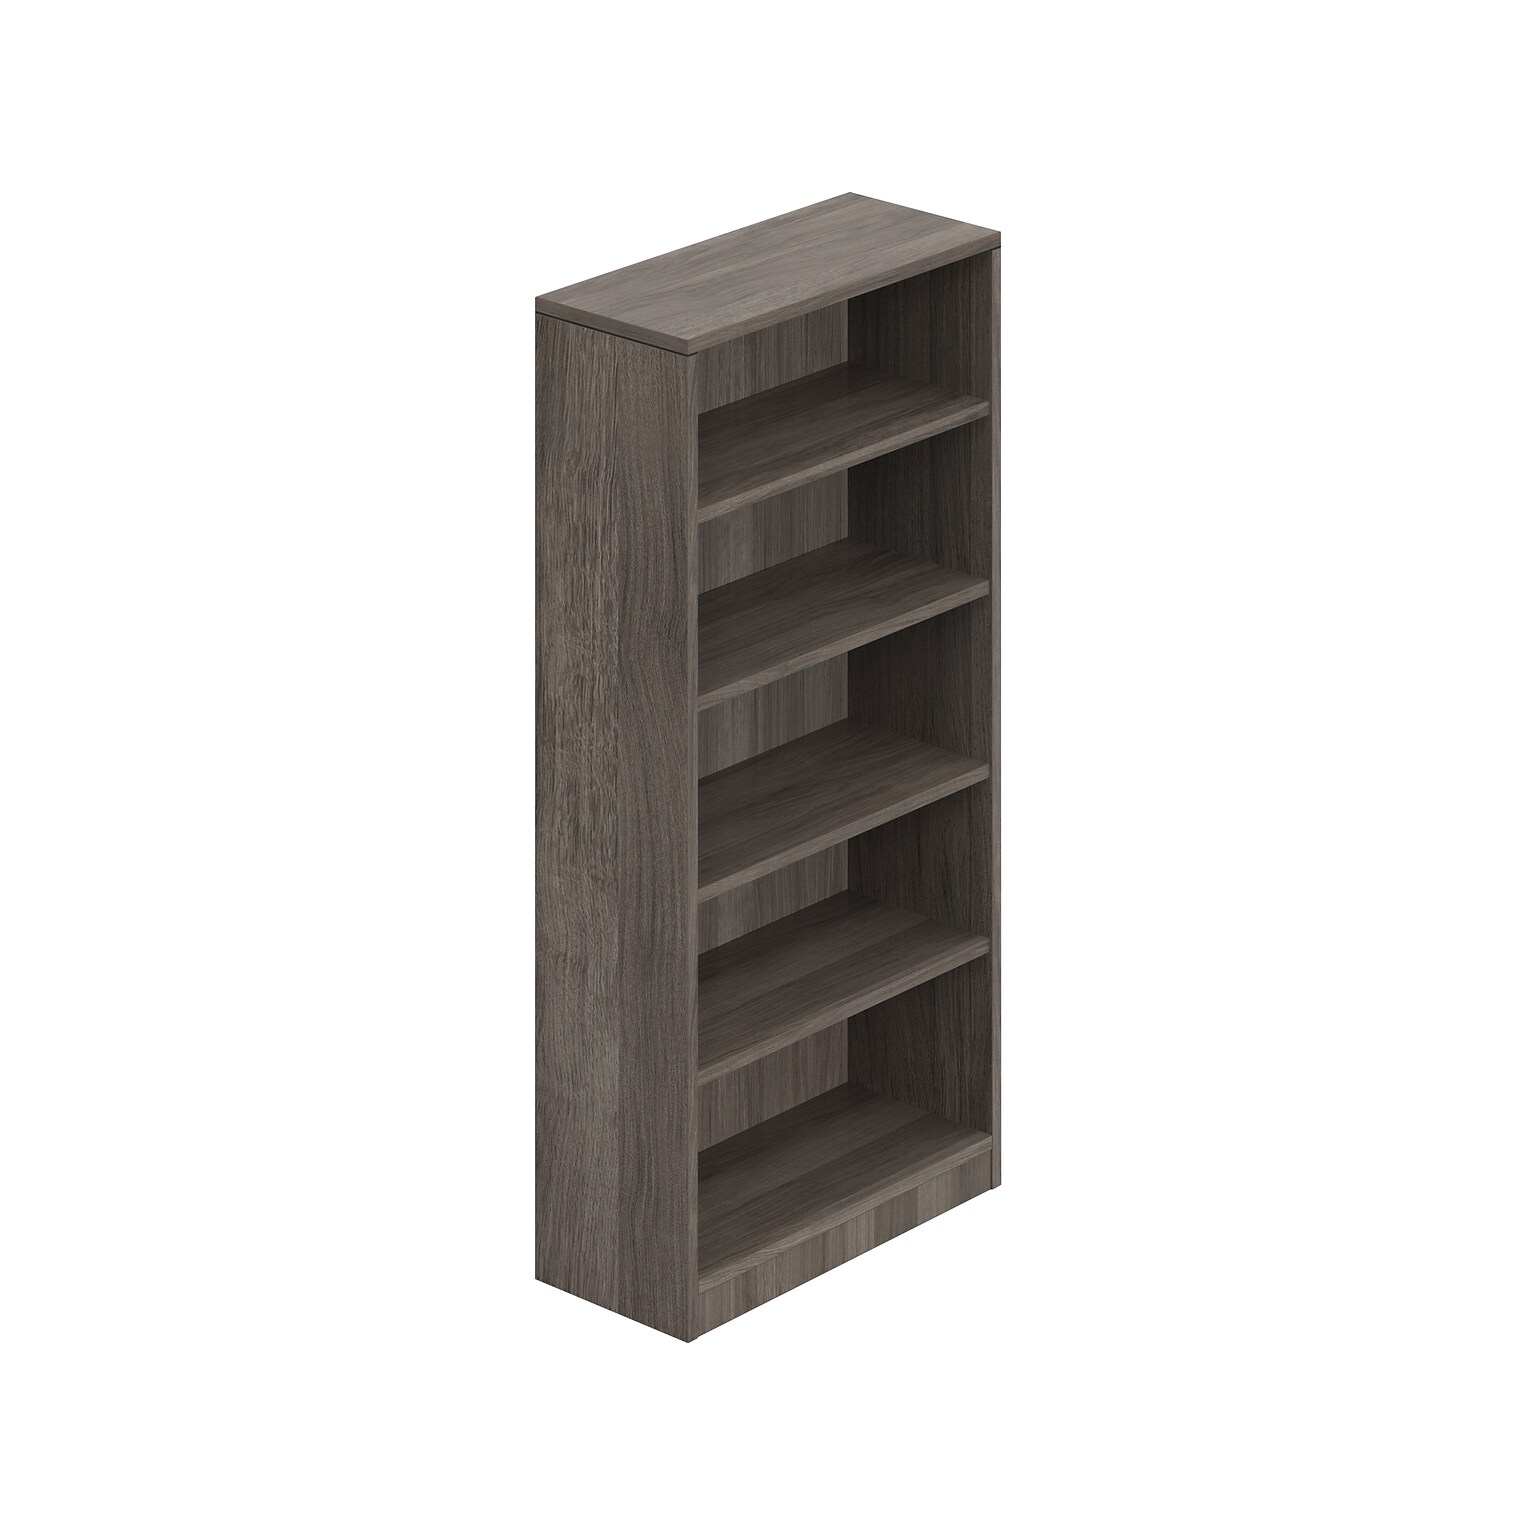 Offices to Go Superior Laminate 71H 4-Shelf Bookcase with Adjustable Shelves, Artisan Gray (TDSL71BC-AGL)